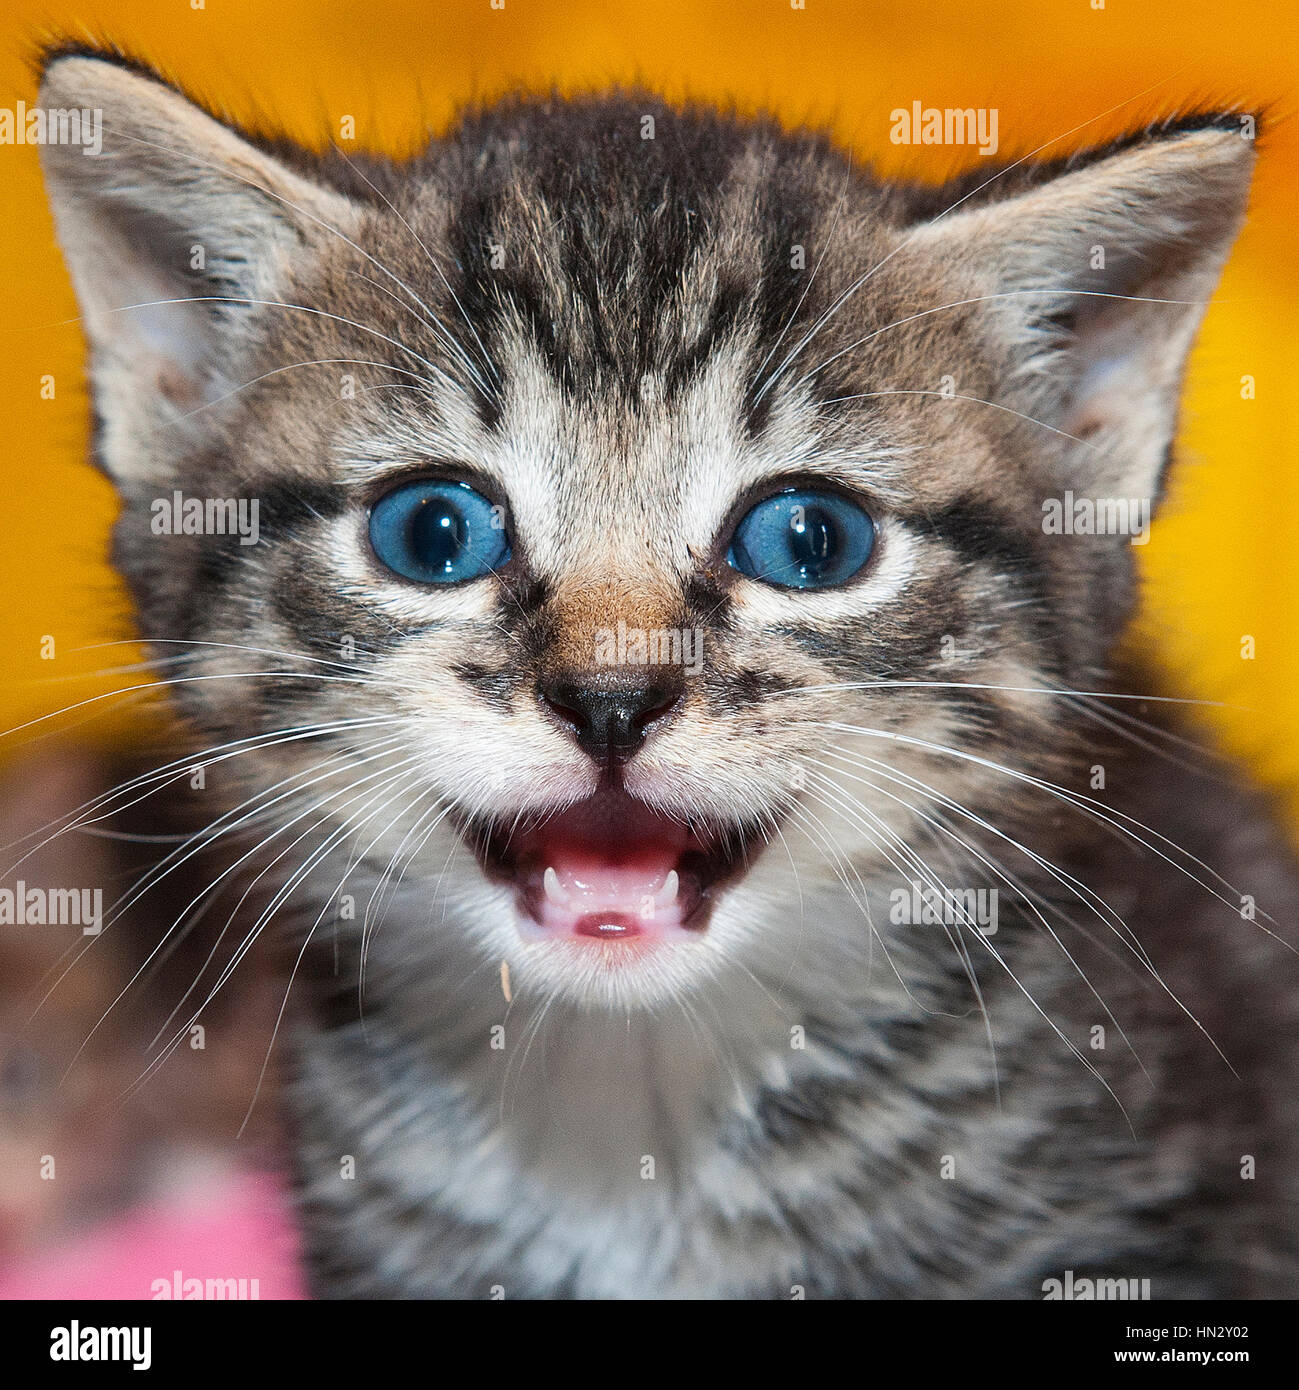 Tiny young blue eyed grey tiger kitten close up looking at camera headshot with mouth open meowing Stock Photo